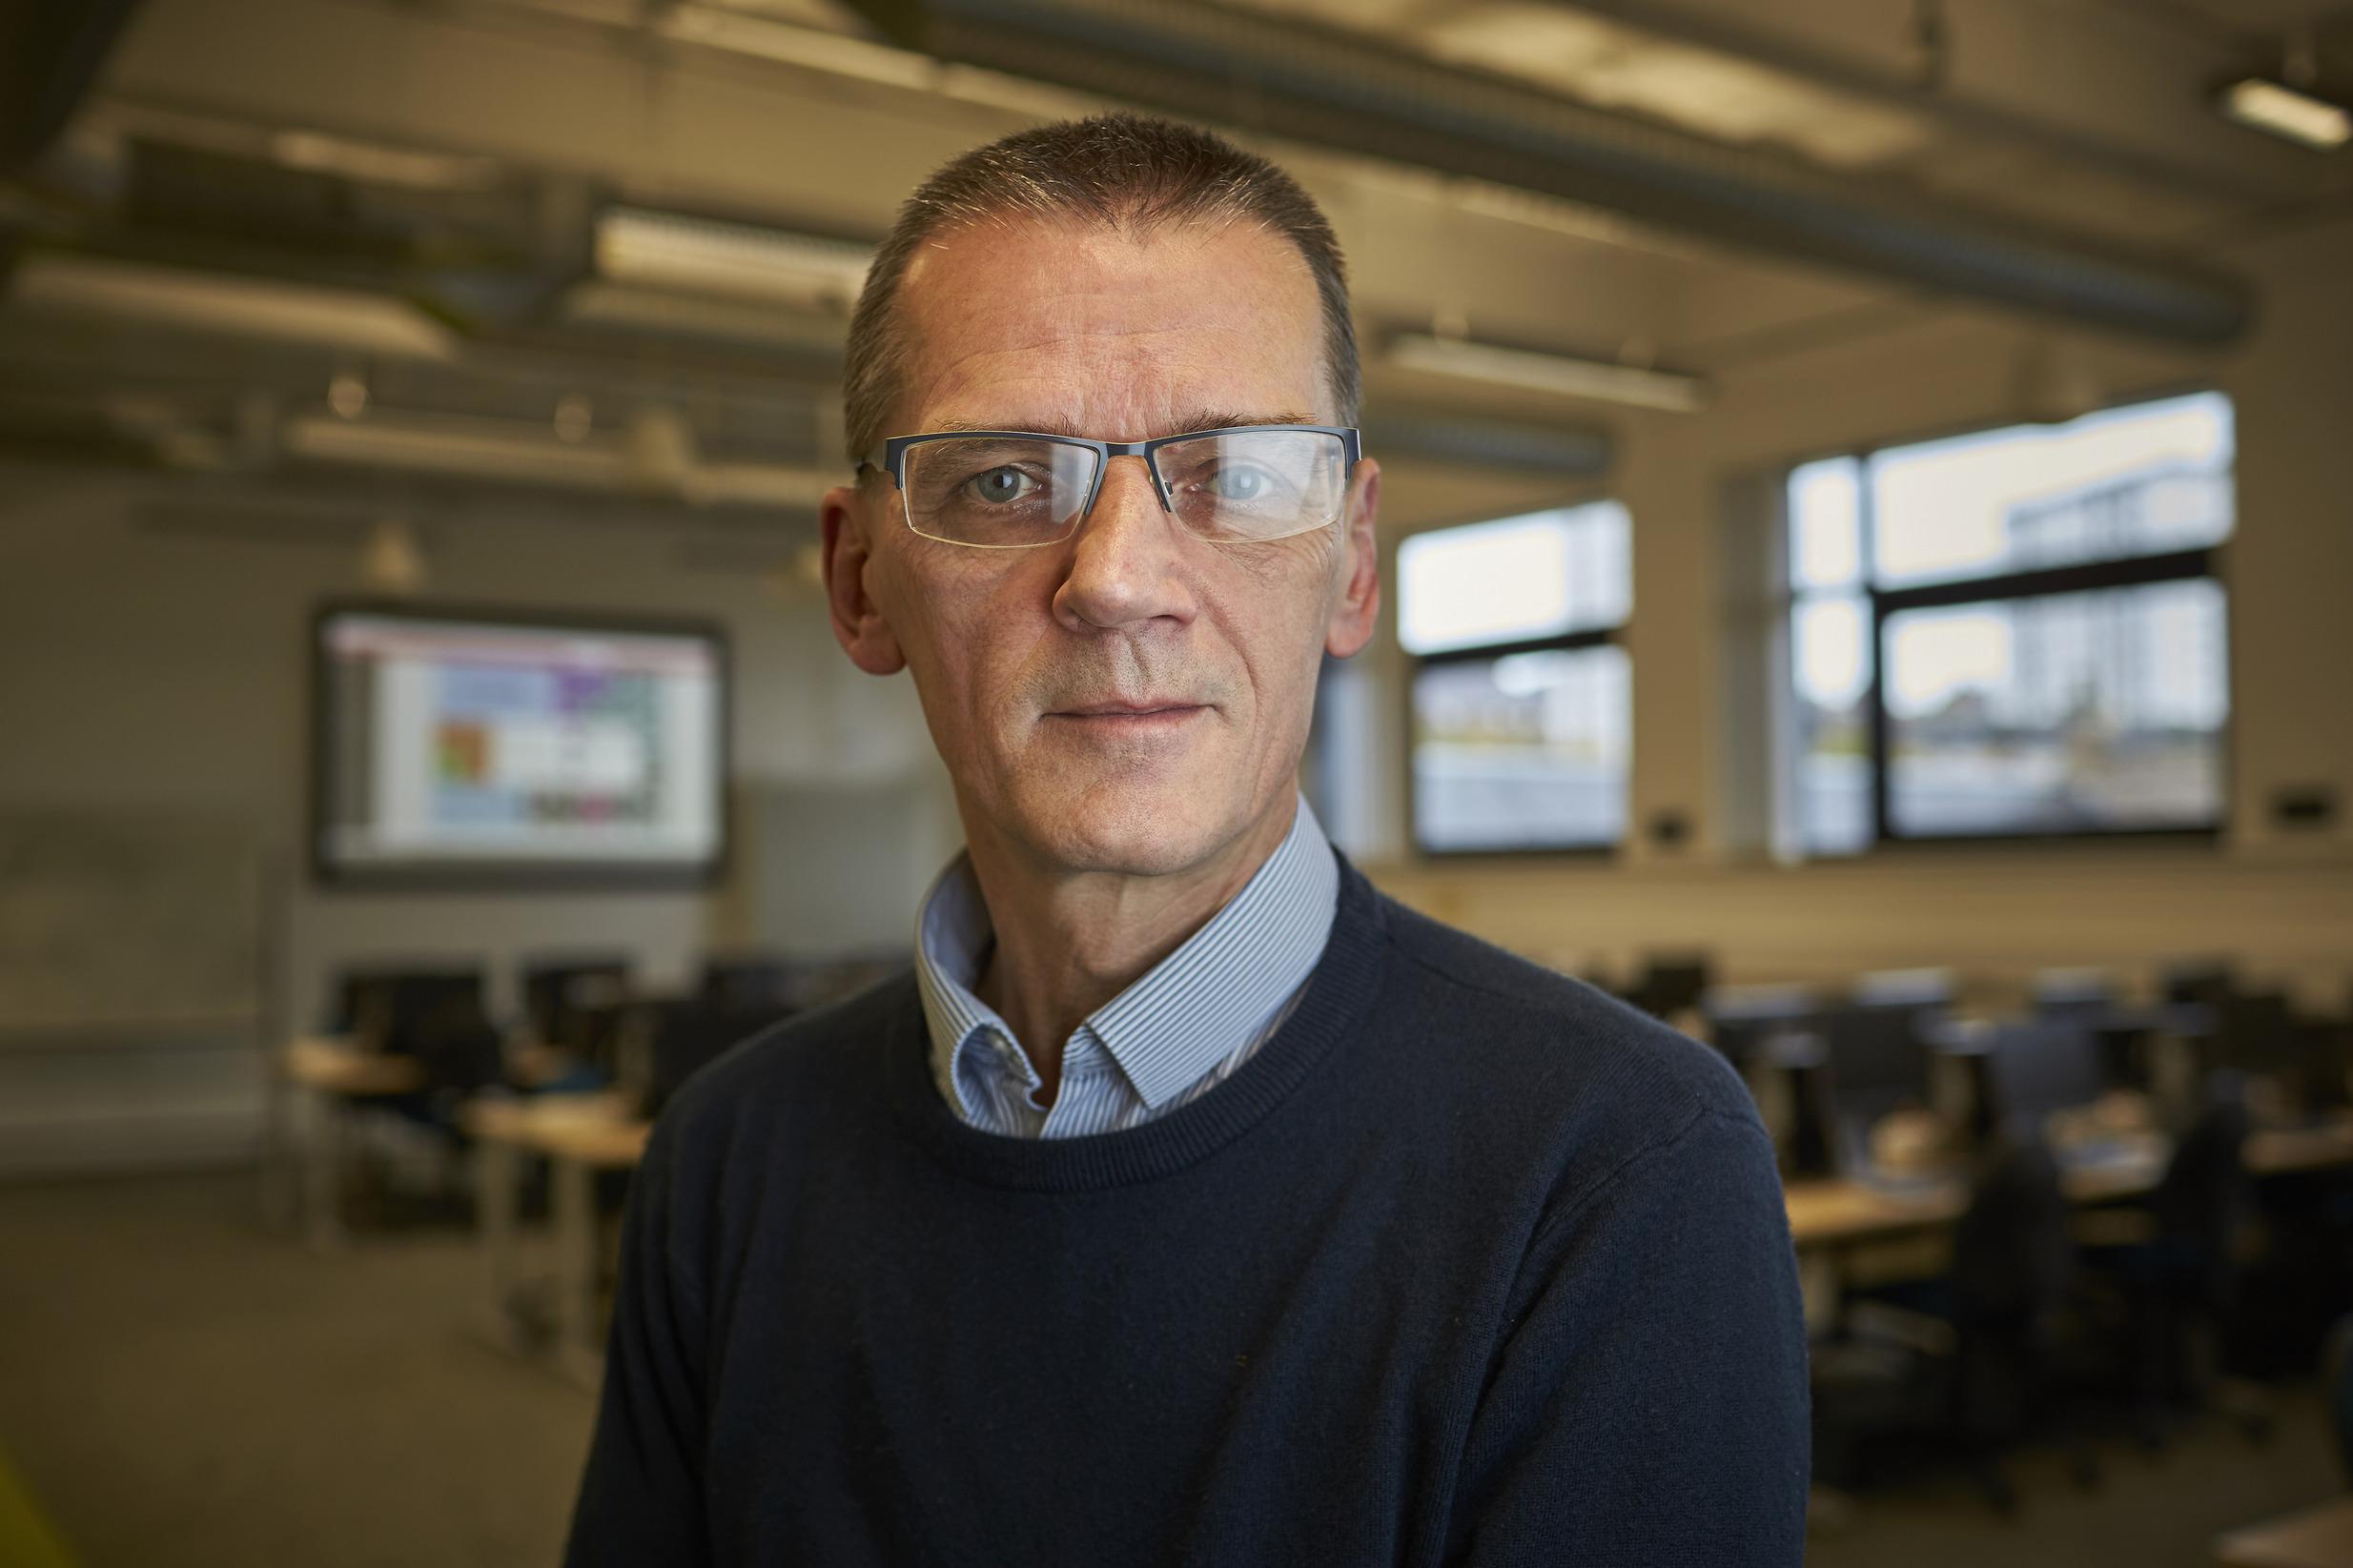 Founder of world first Ethical Hacking degree retires from Abertay University